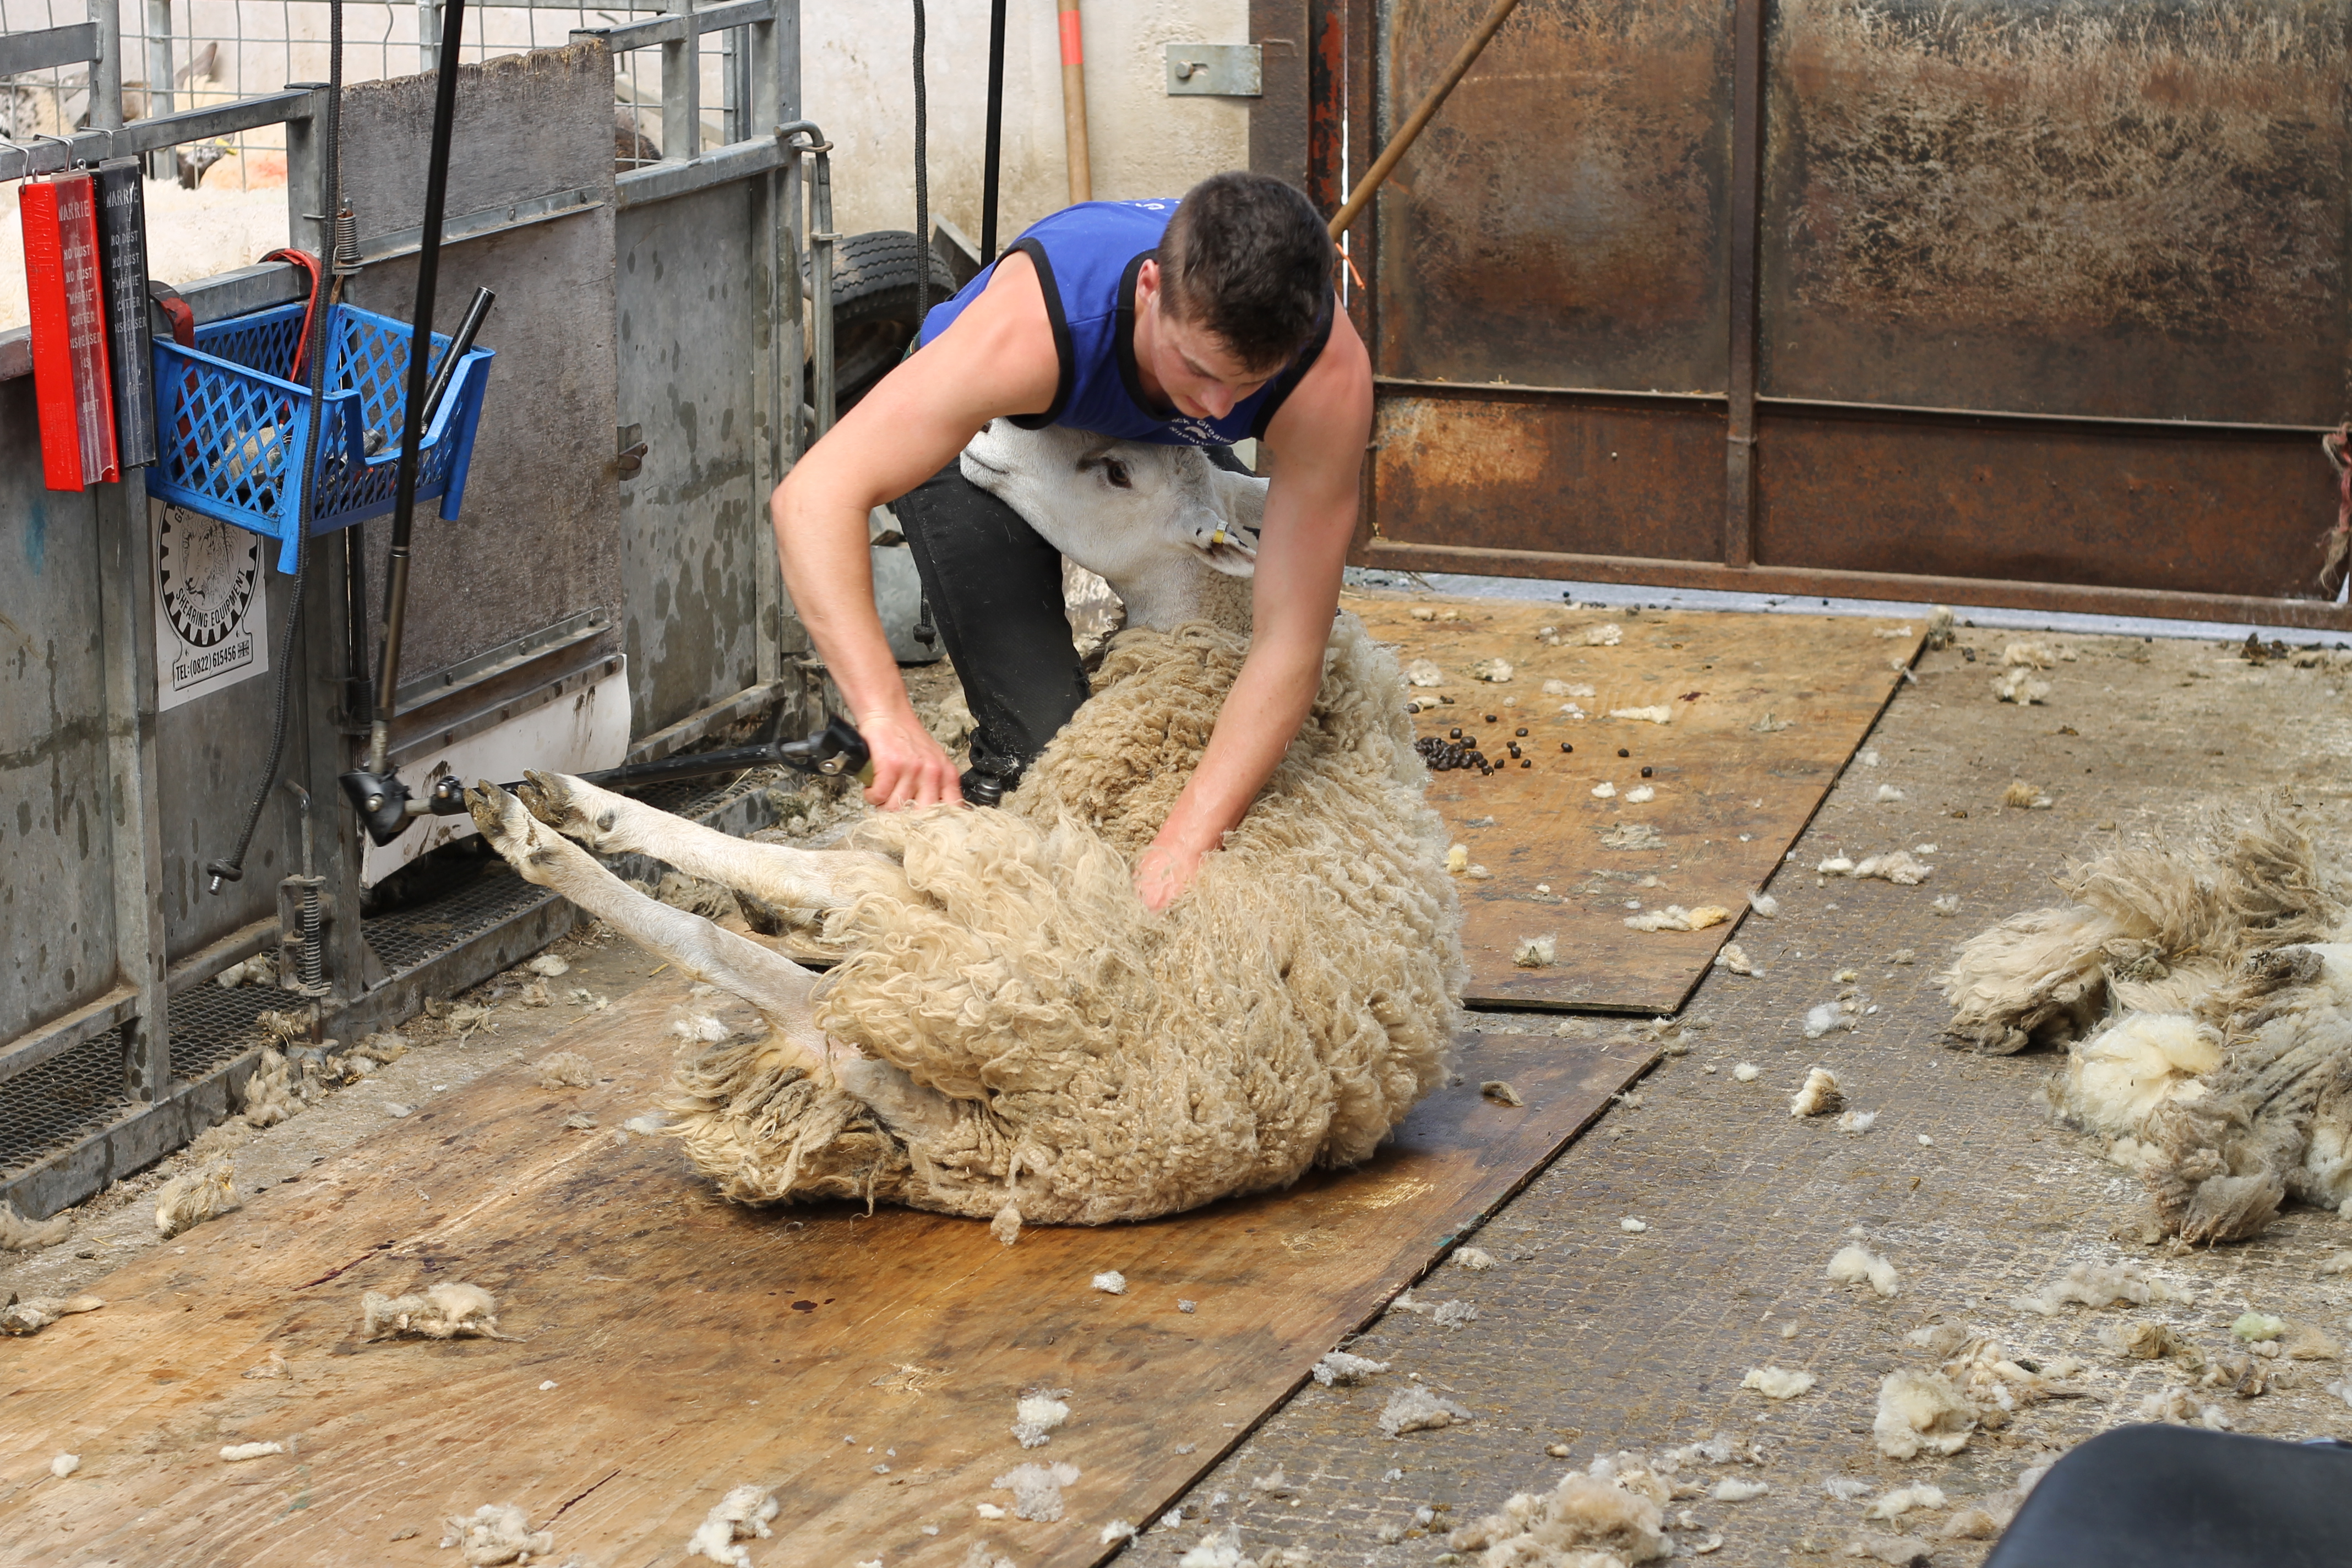 Sheep shearing Course June 9th-10th 2016 - Reaseheath College